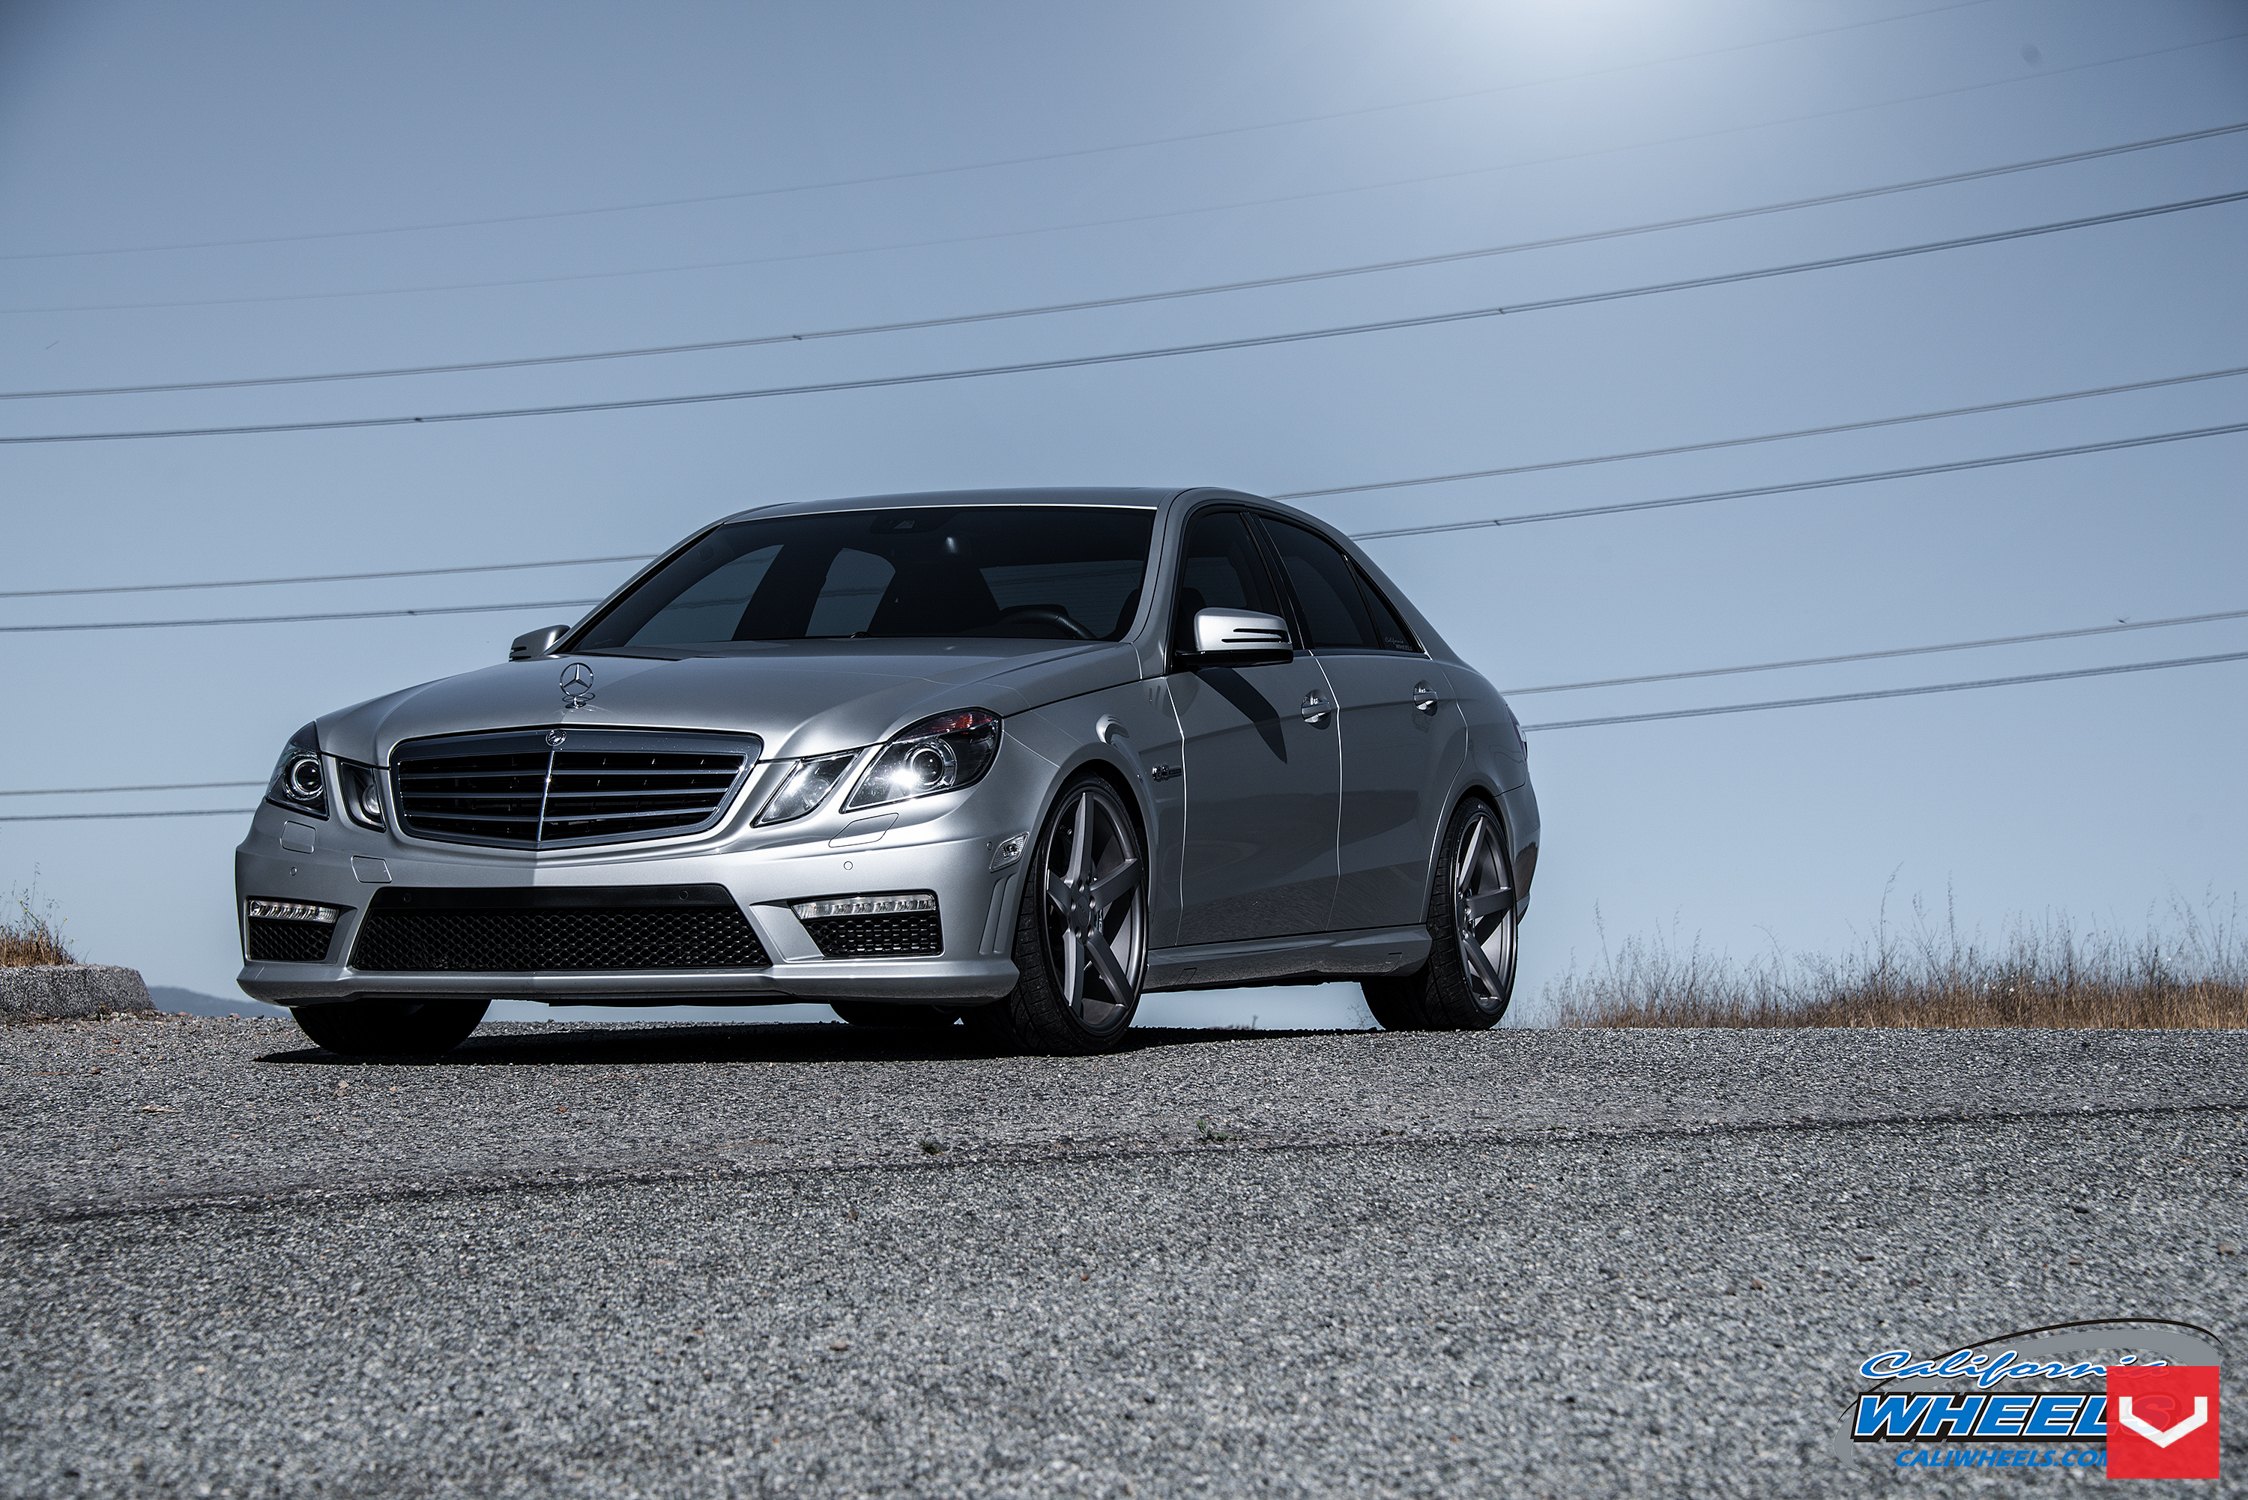 Silver Mercedes E Class with Custom LED Headlights - Photo by Vossen